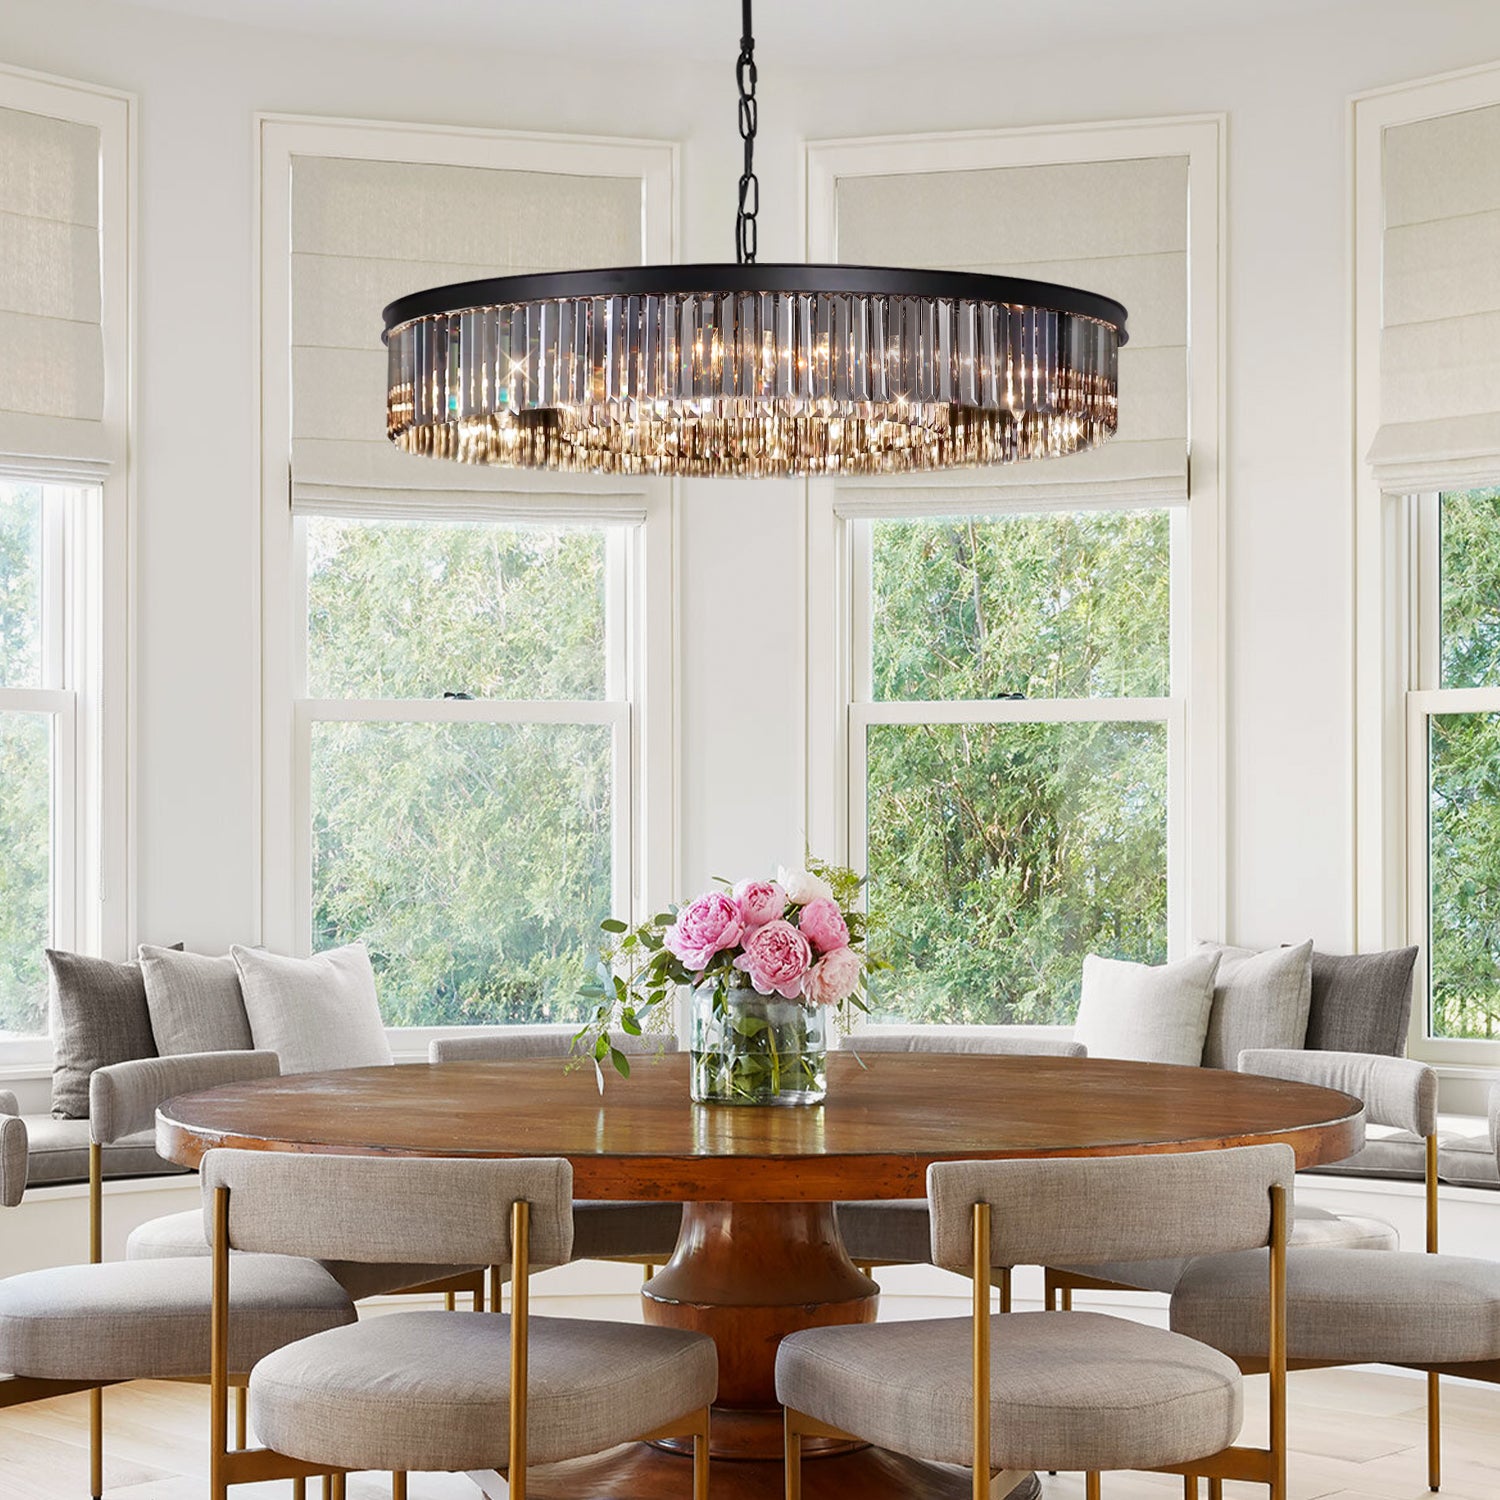 A black crystal chandelier round design-pendant light for the dining room | Sofary